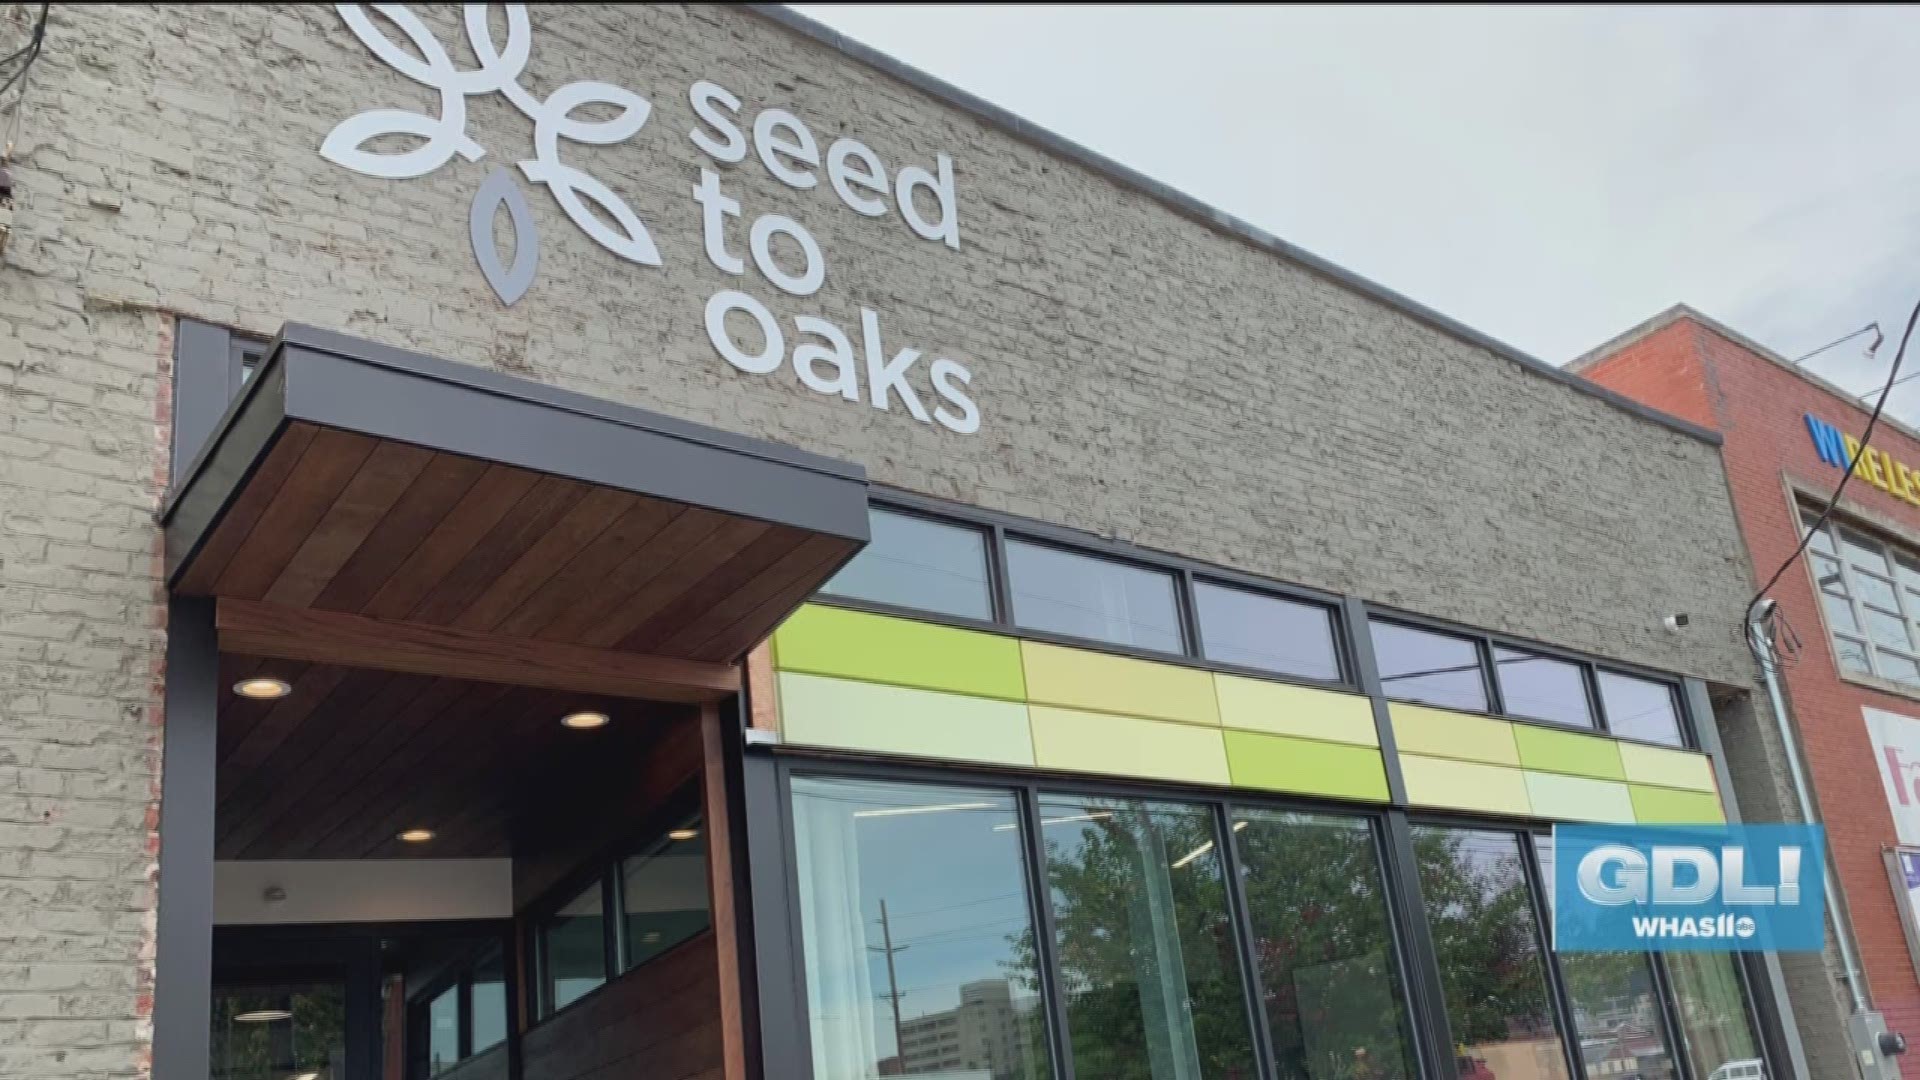 You can visit the open house for Seed to Oaks on Thursday, August 22, 2019, from 6-8 PM at 710 East Broadway. You can learn more online at SeedToOaks.com.